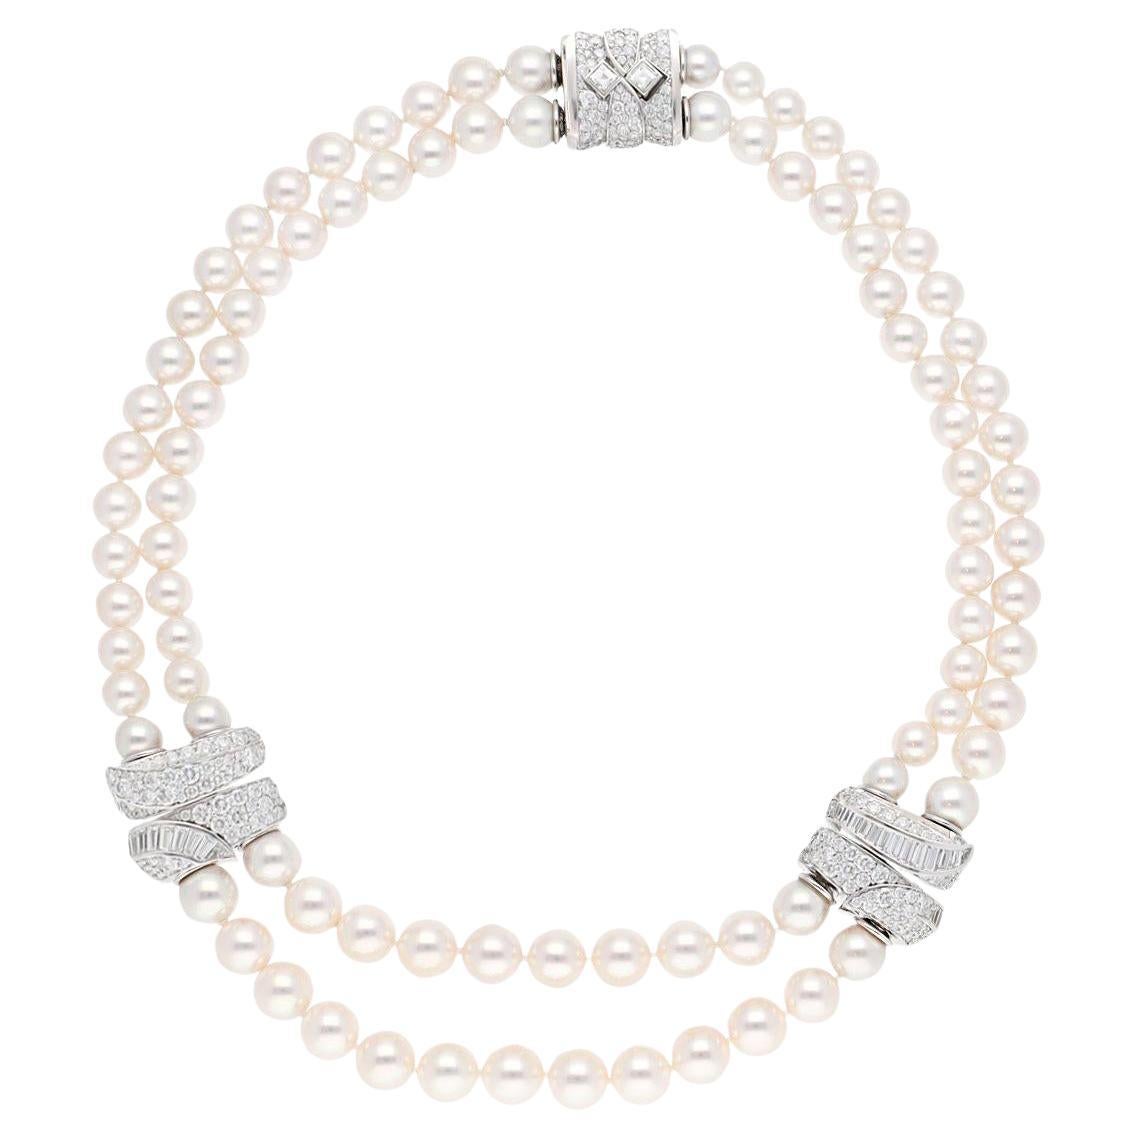 Van Cleef & Arpels 2 - Row Pearl Necklace with 3 - Diamond Barrel Clasps For Sale